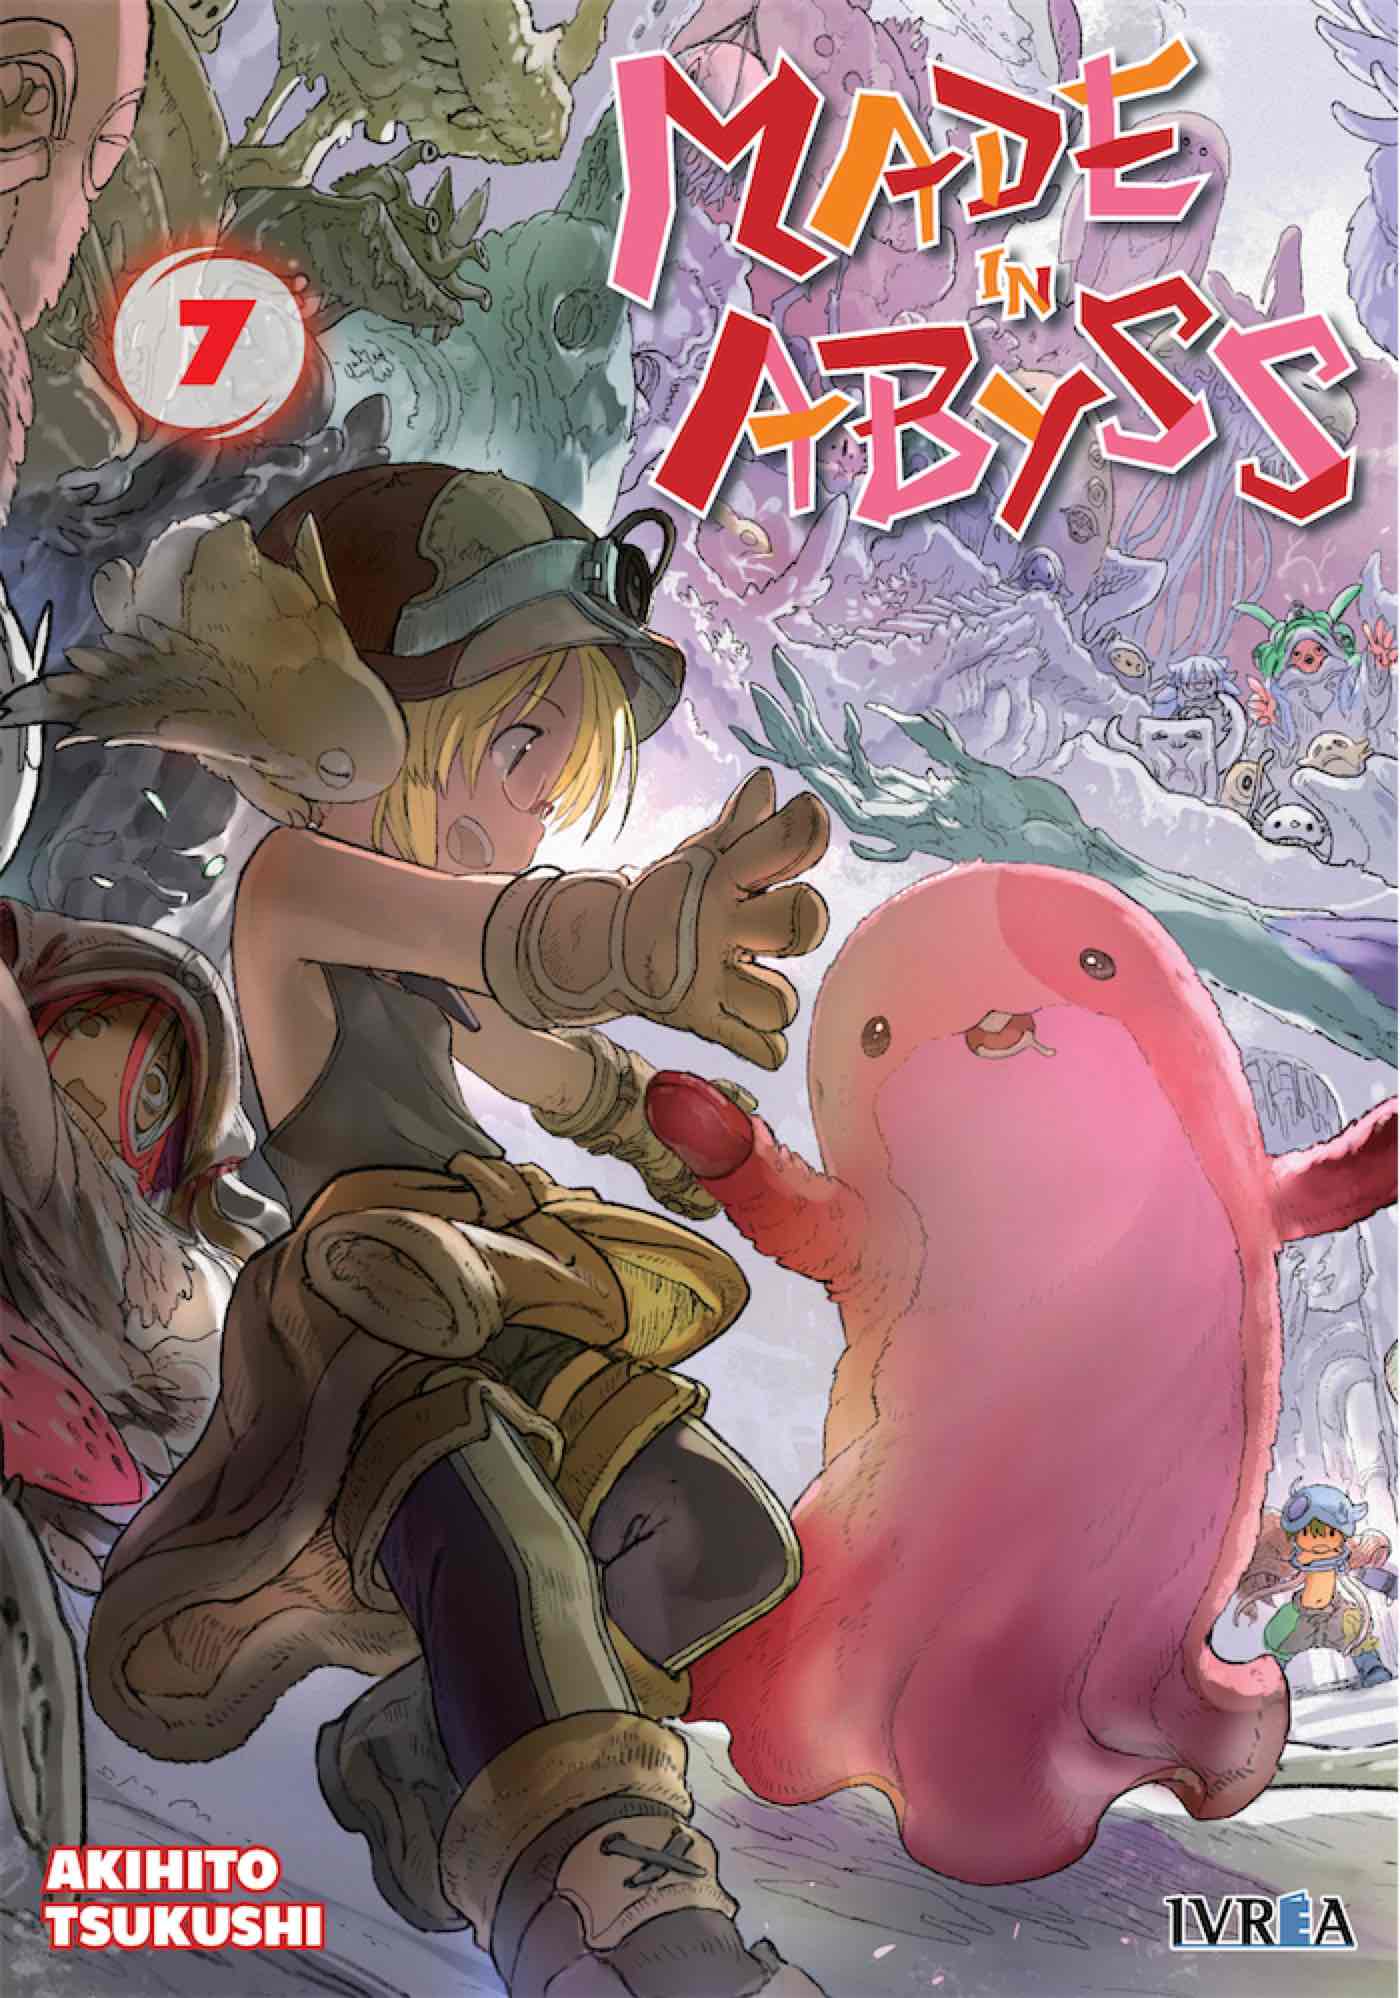 MADE IN ABYSS 07 (COMIC)